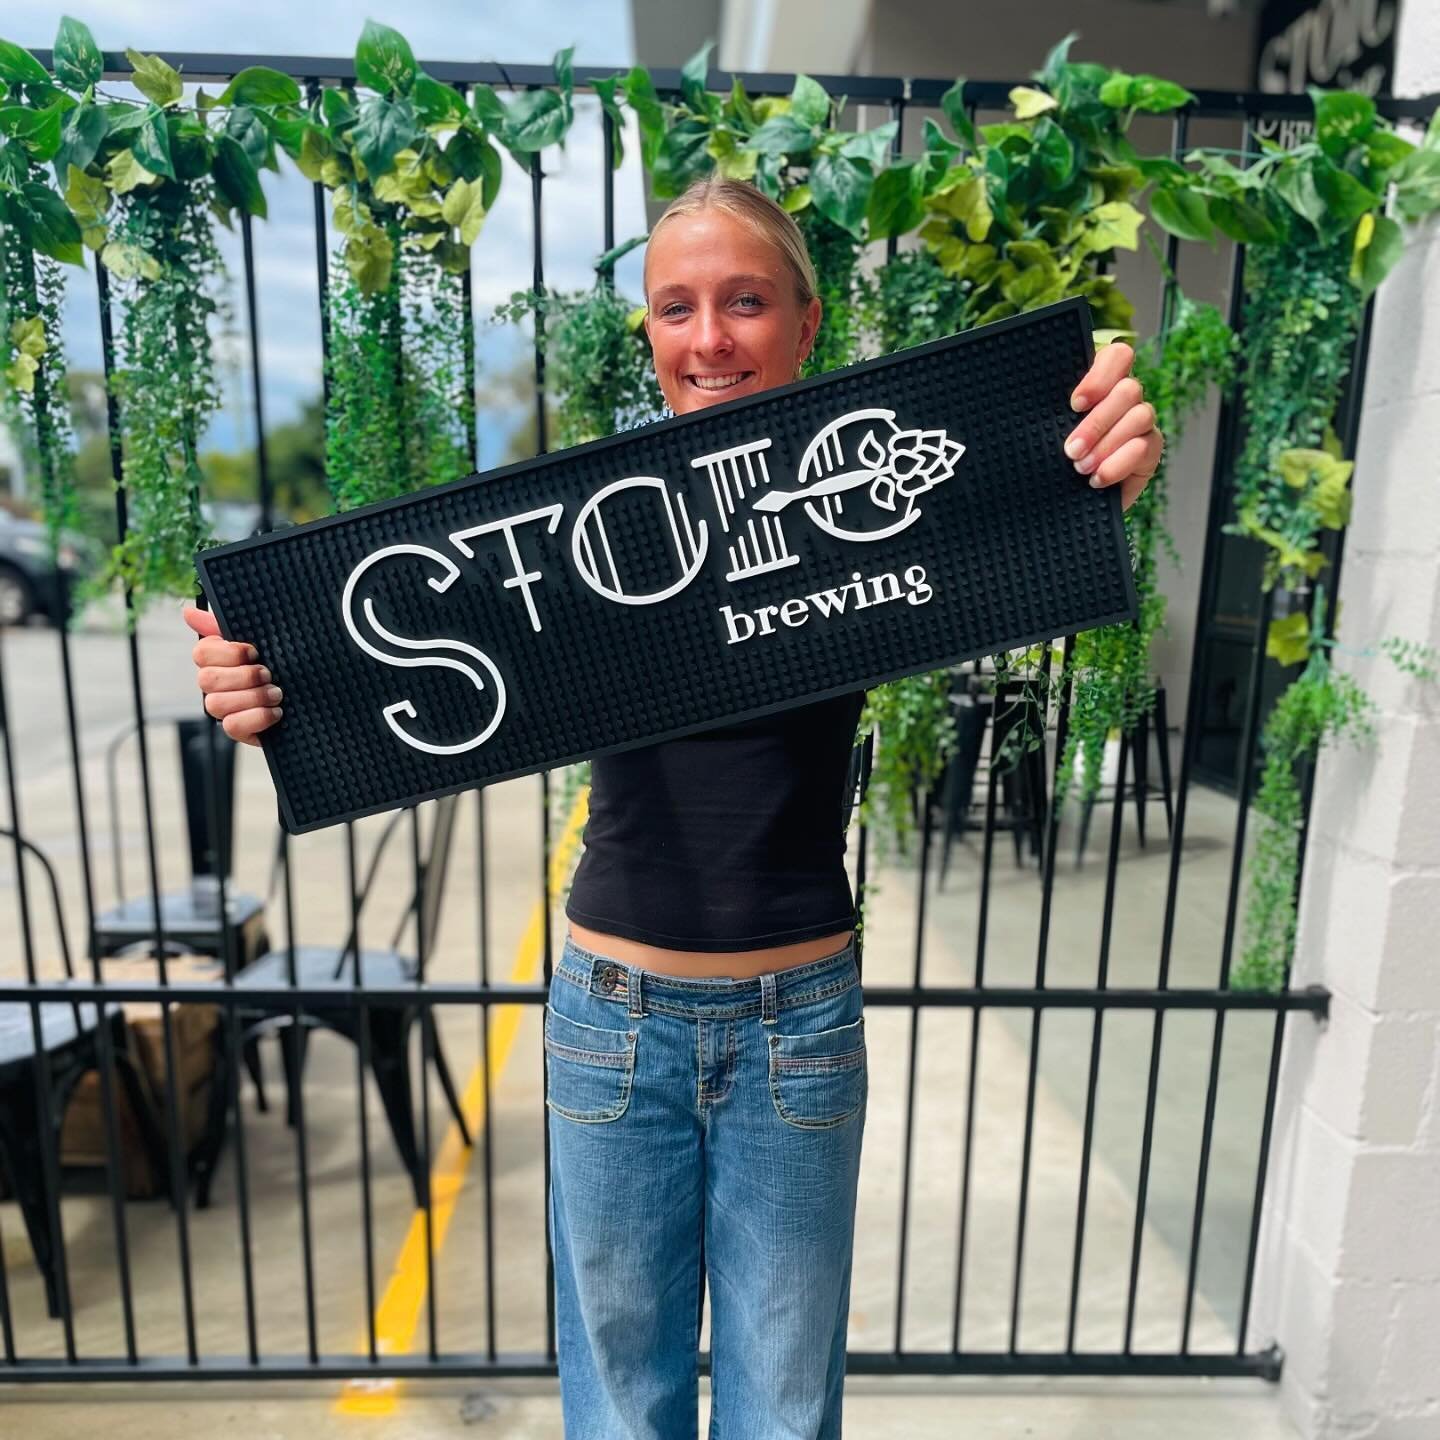 Want to 🌟WIN🌟 a Stoic bar mat?! 🍻

Sign up to our Stoic Society Subscription before Sunday 12th May for your chance to WIN 1 of 3 Stoic bar mats!

3 lucky subscribers selected at random, will receive a FREE Stoic Bar Mat (valued at $50) with their